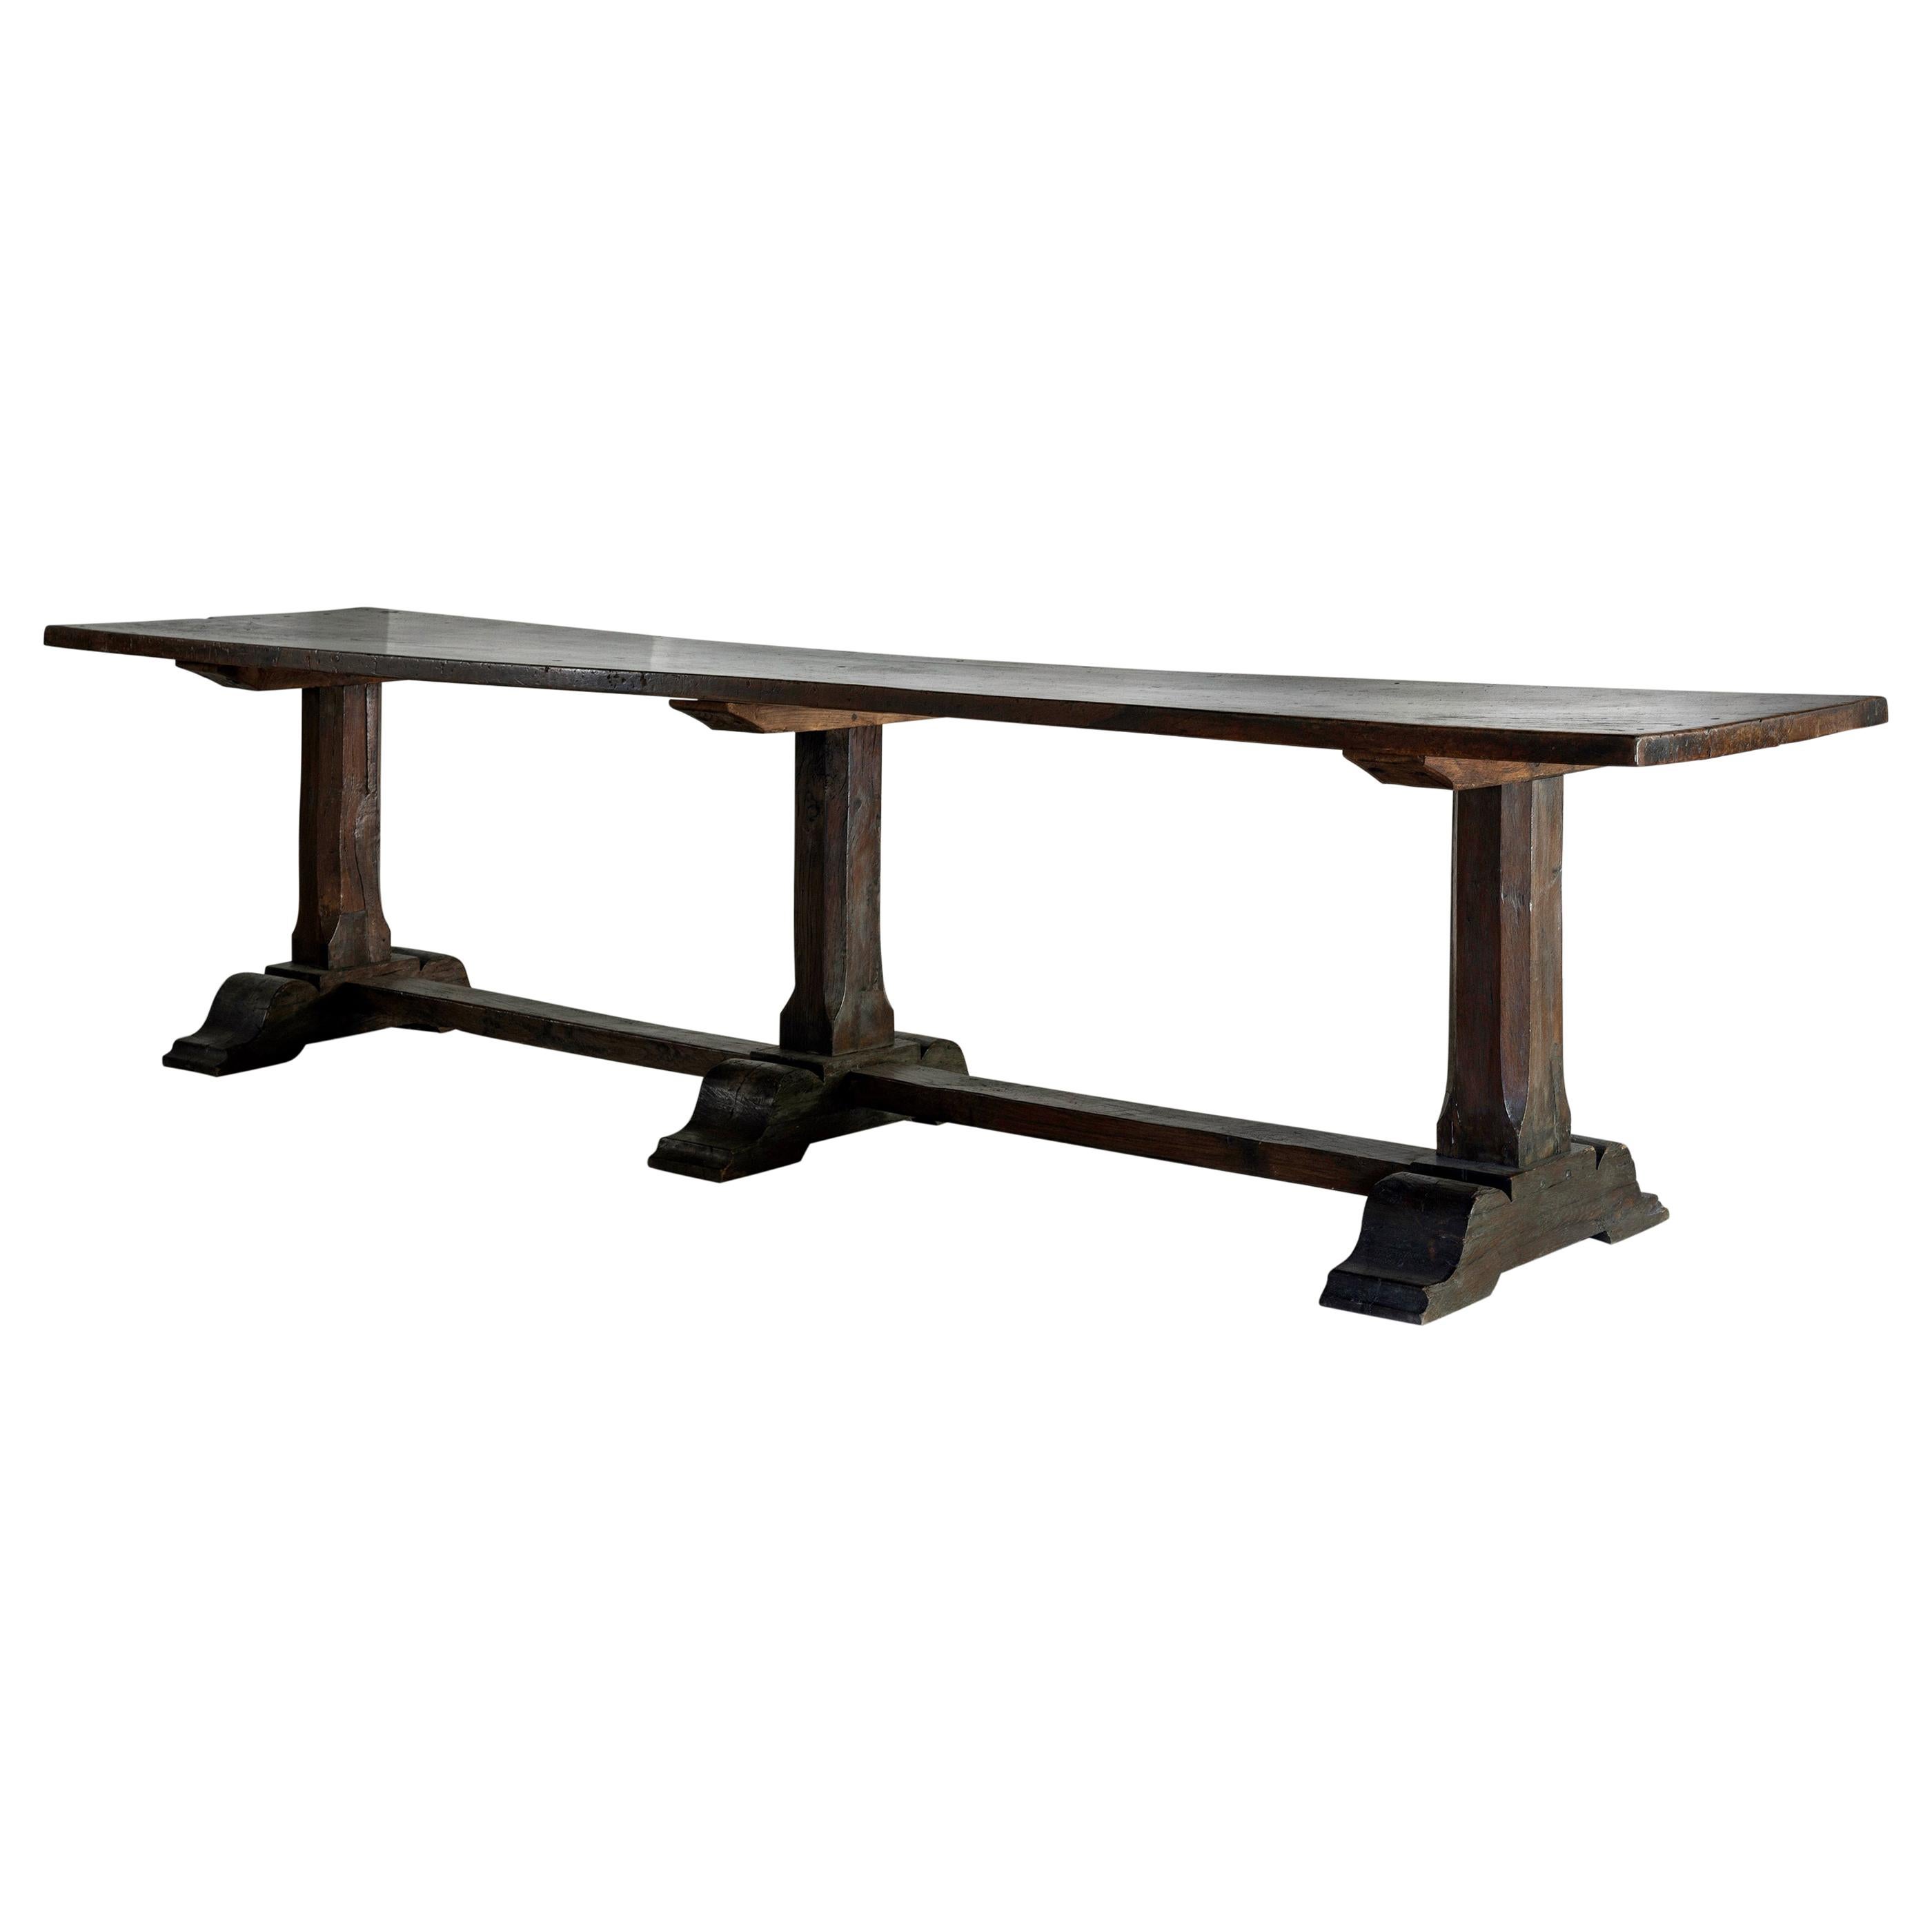 Exceptional Very Large Italian 17th Century Minimal Convent Table